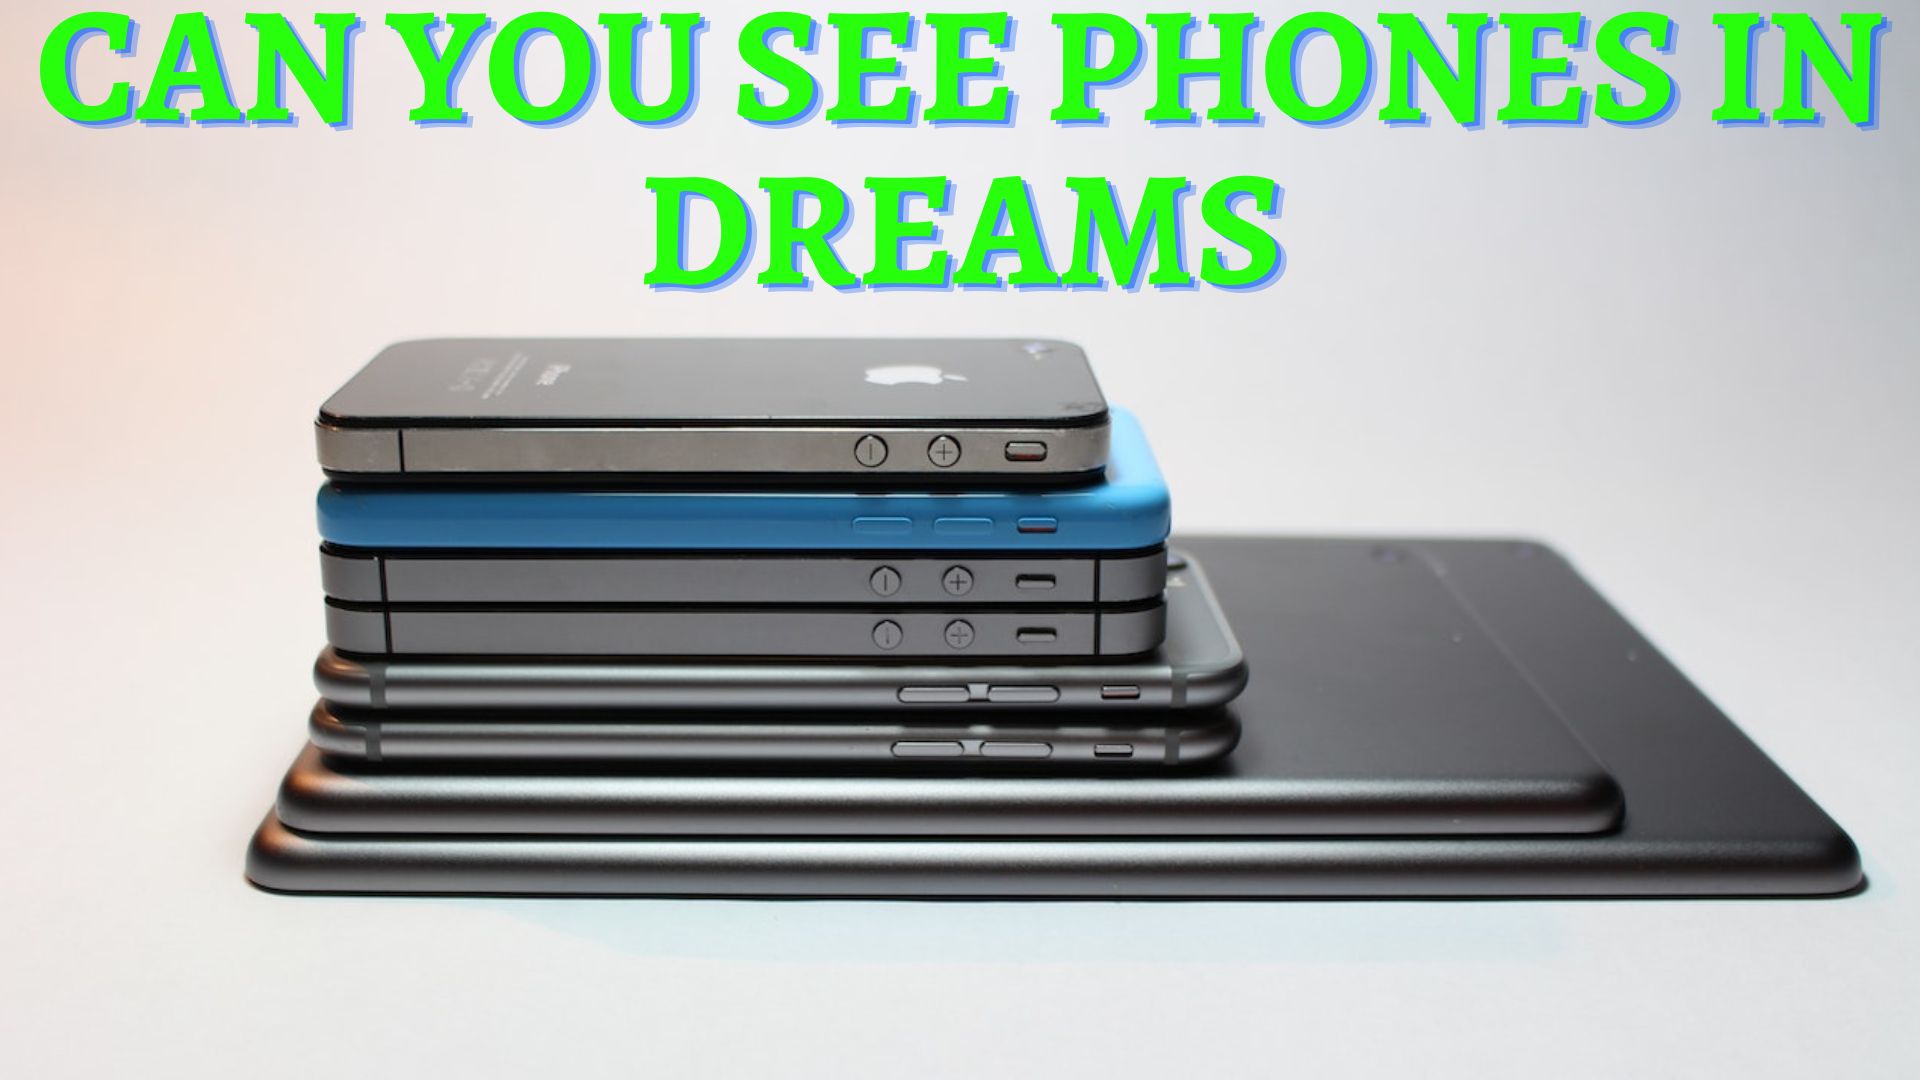 Can You See Phones In Dreams - Meaning And Interpretation